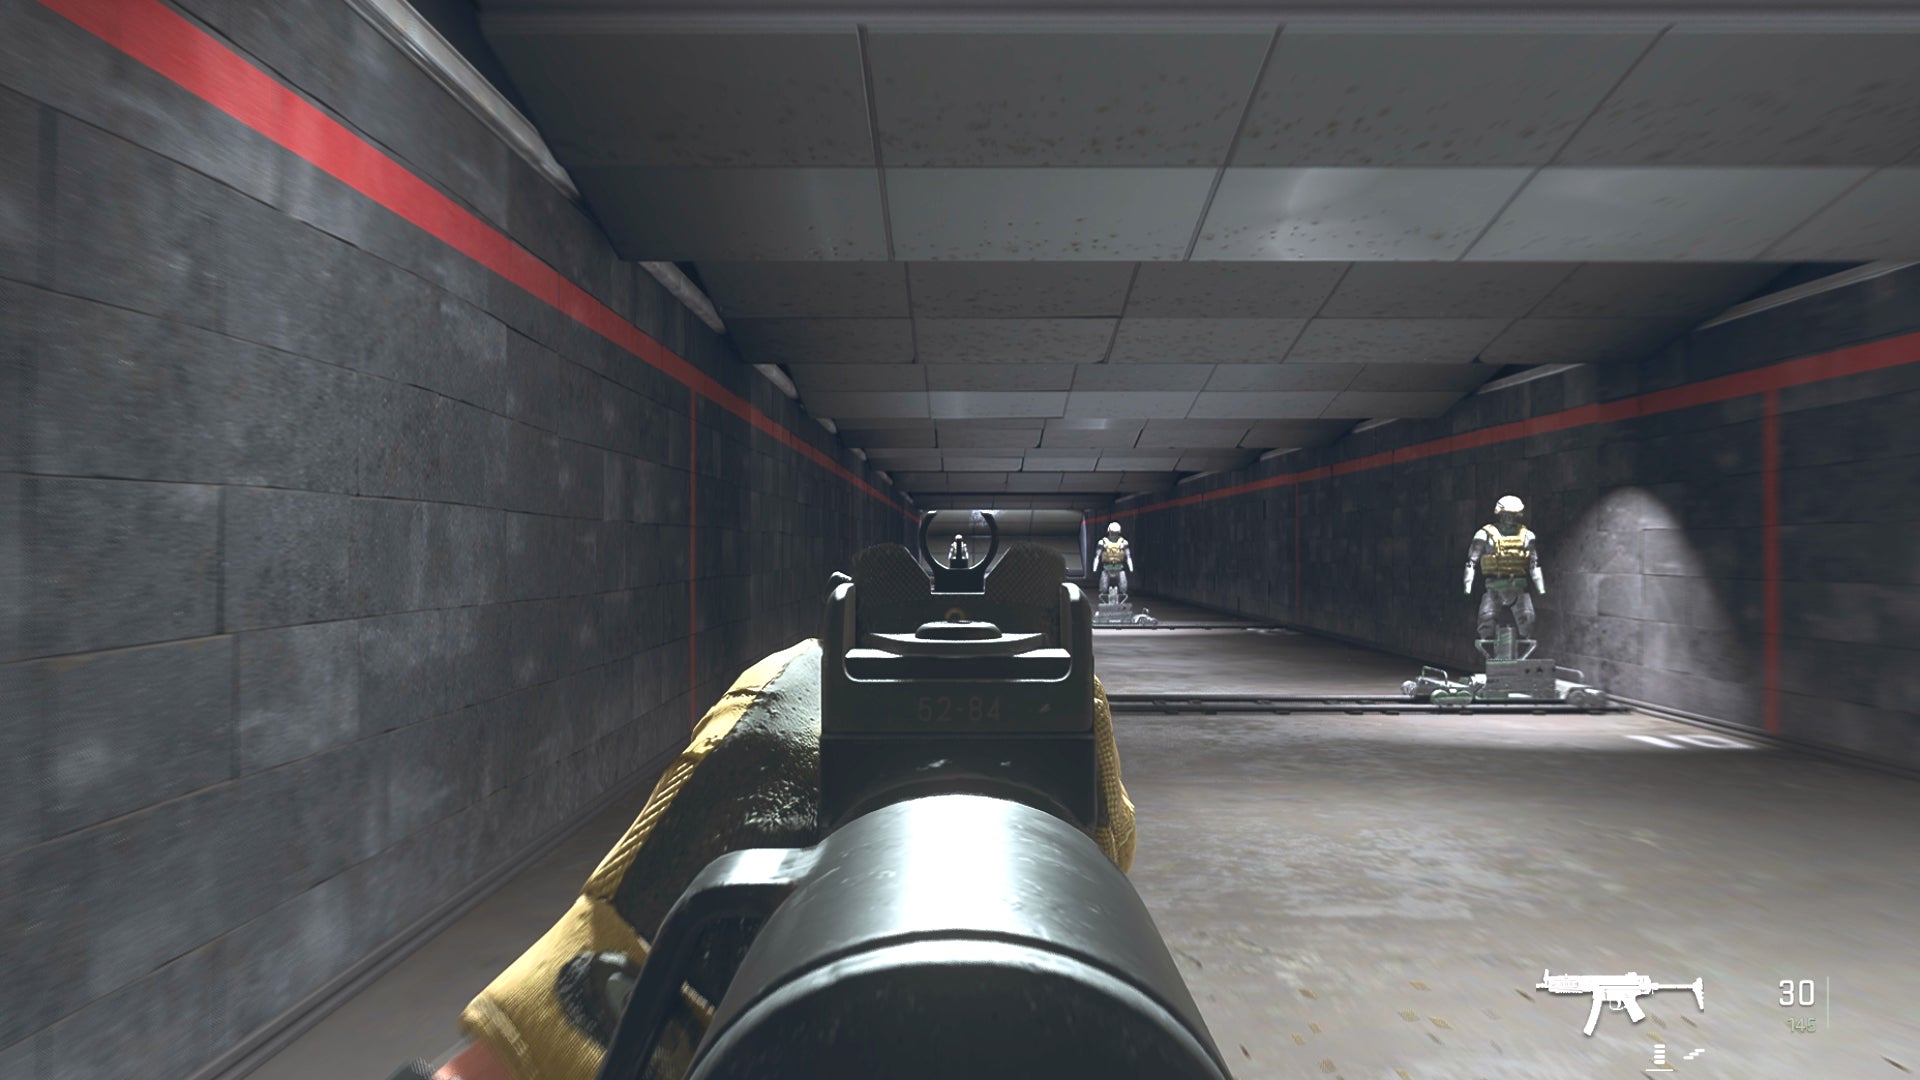 The player in Warzone 2.0 aims at a training dummy with the Lachmann Sub ironsights.